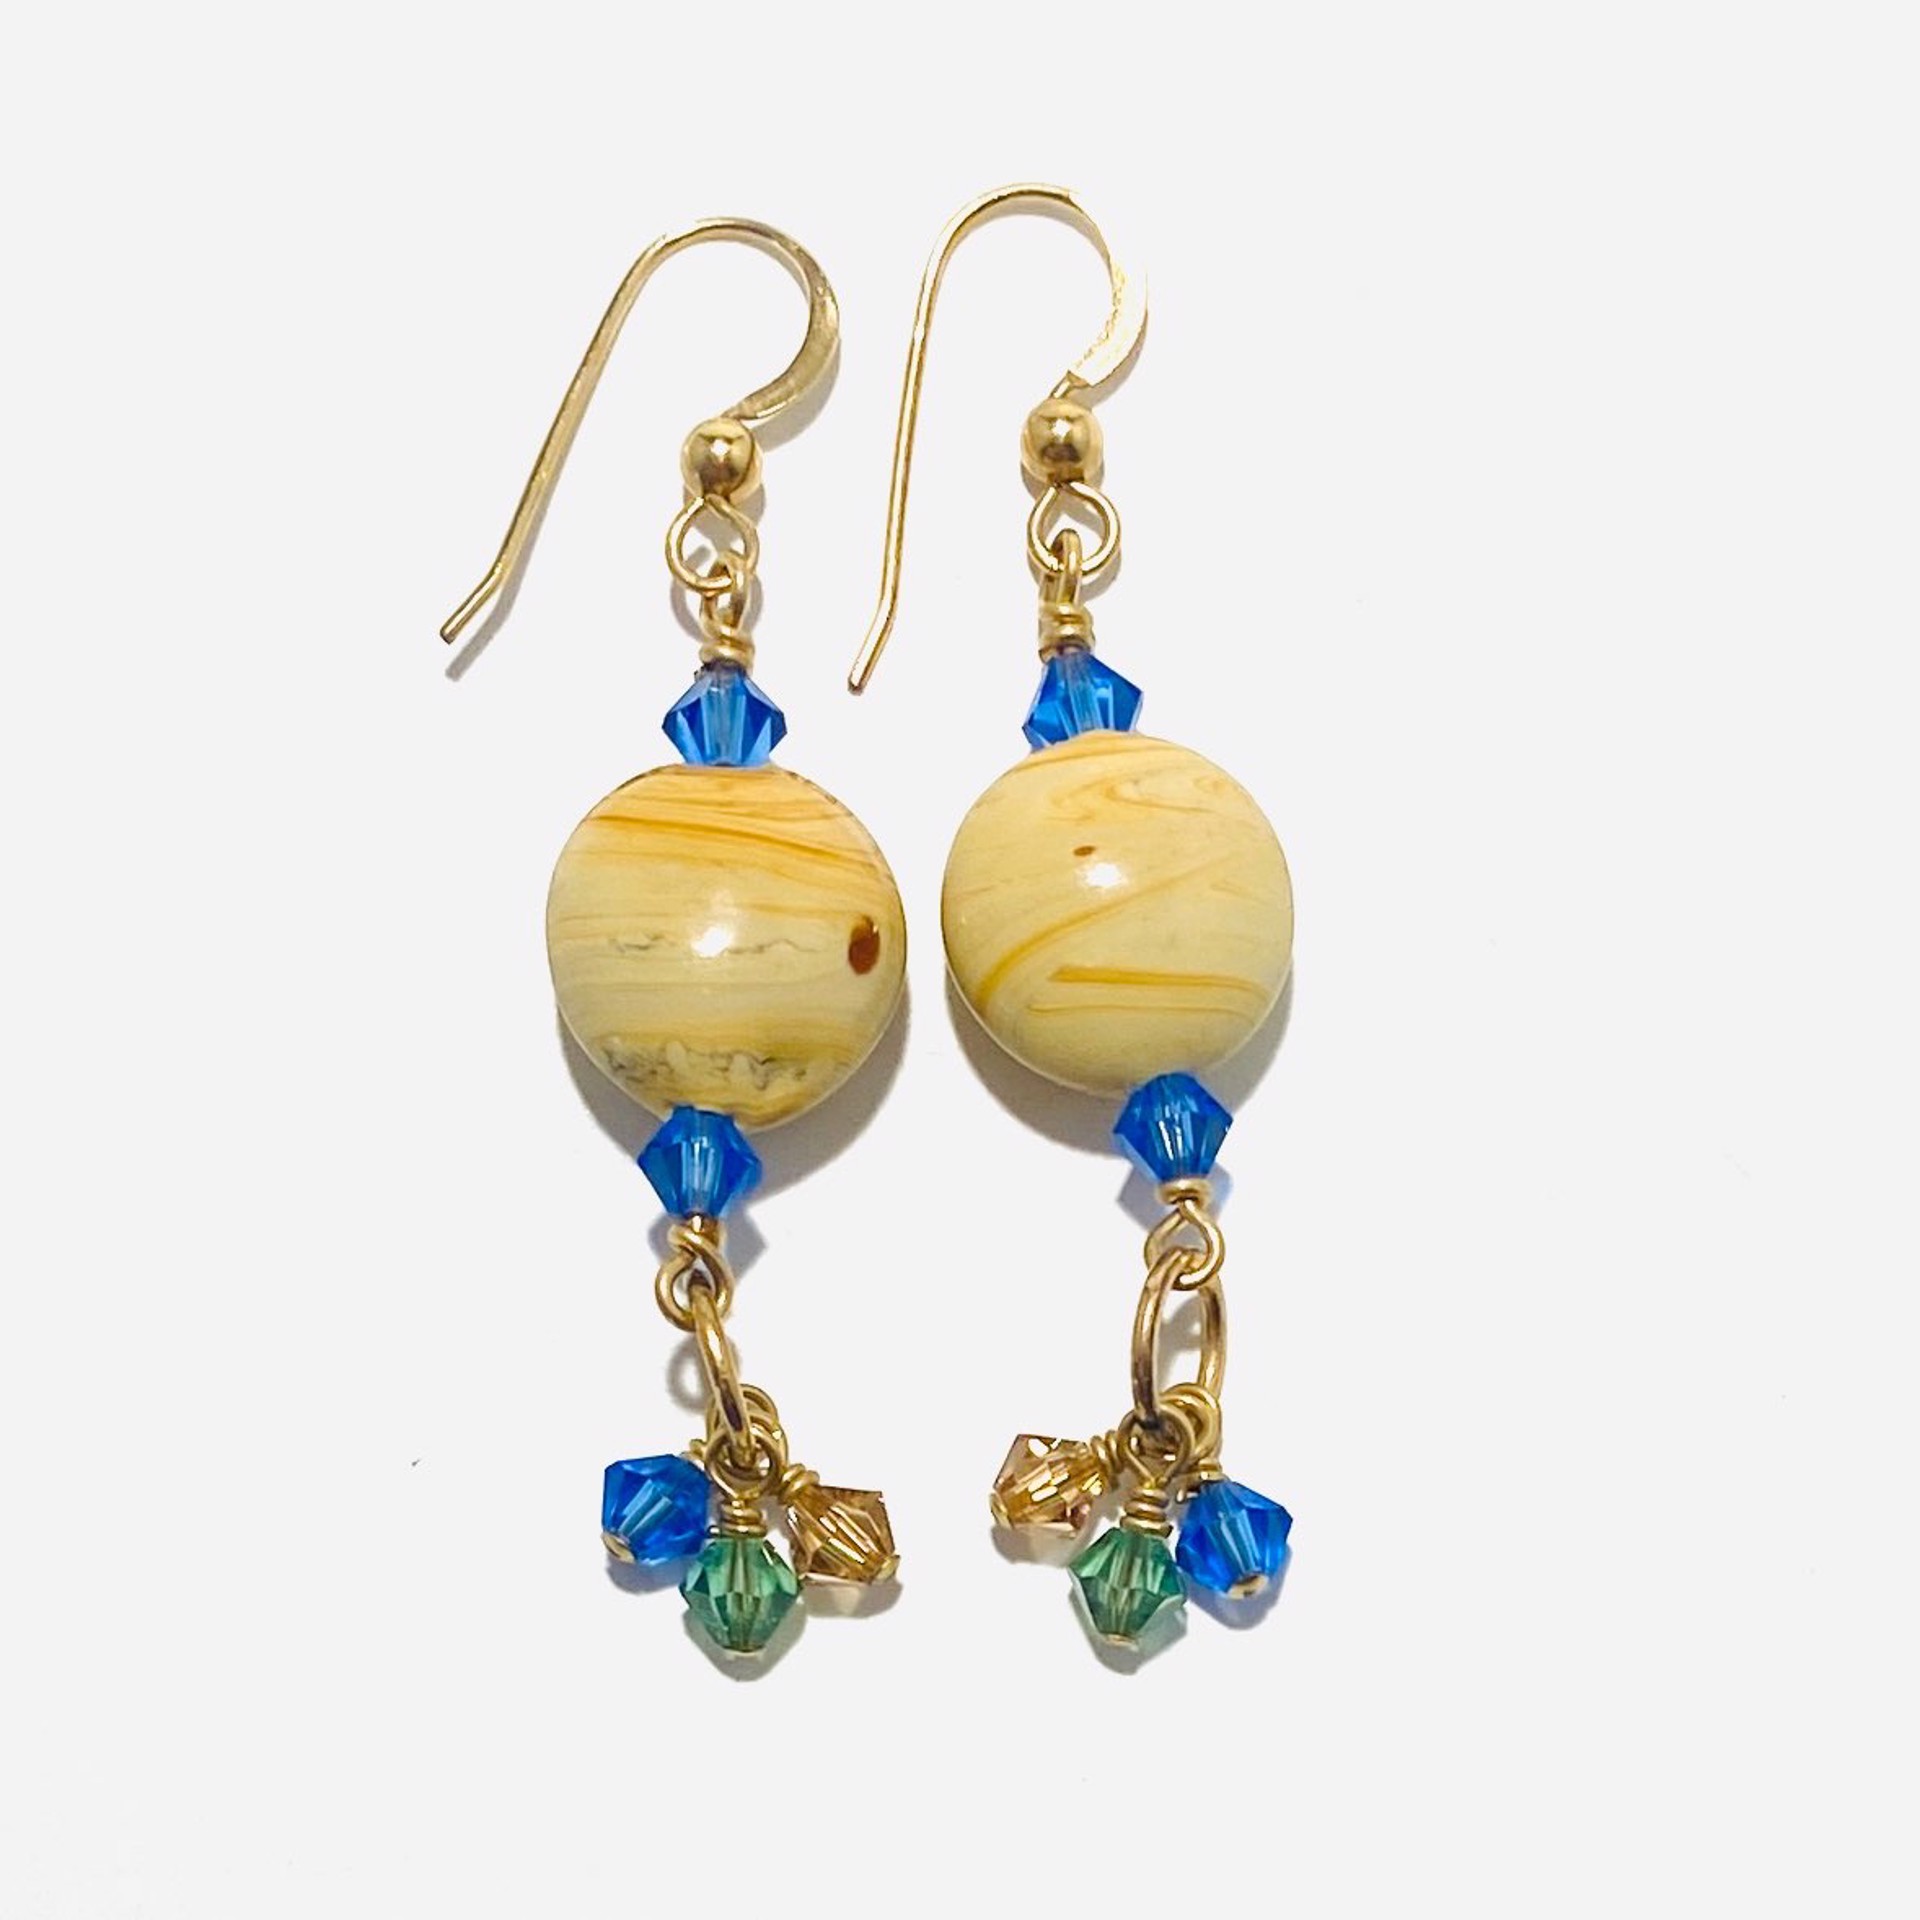 Ceramic Bead and Crystal GF Earrings LR23-42 by Legare Riano